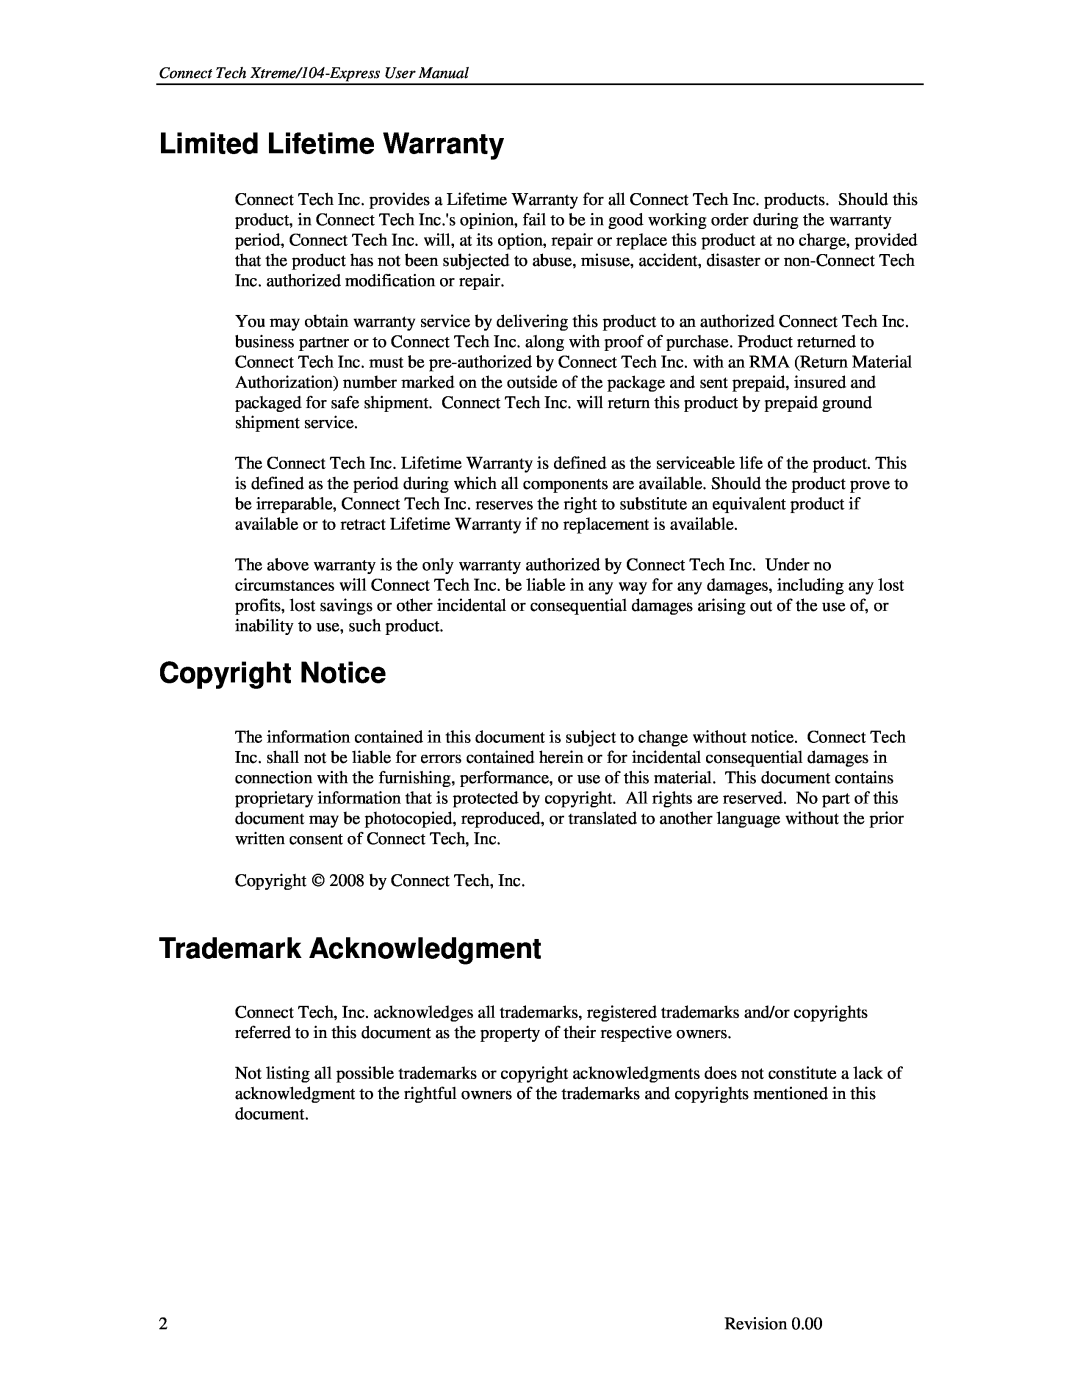 Connect Tech 104 user manual Limited Lifetime Warranty, Copyright Notice, Trademark Acknowledgment 